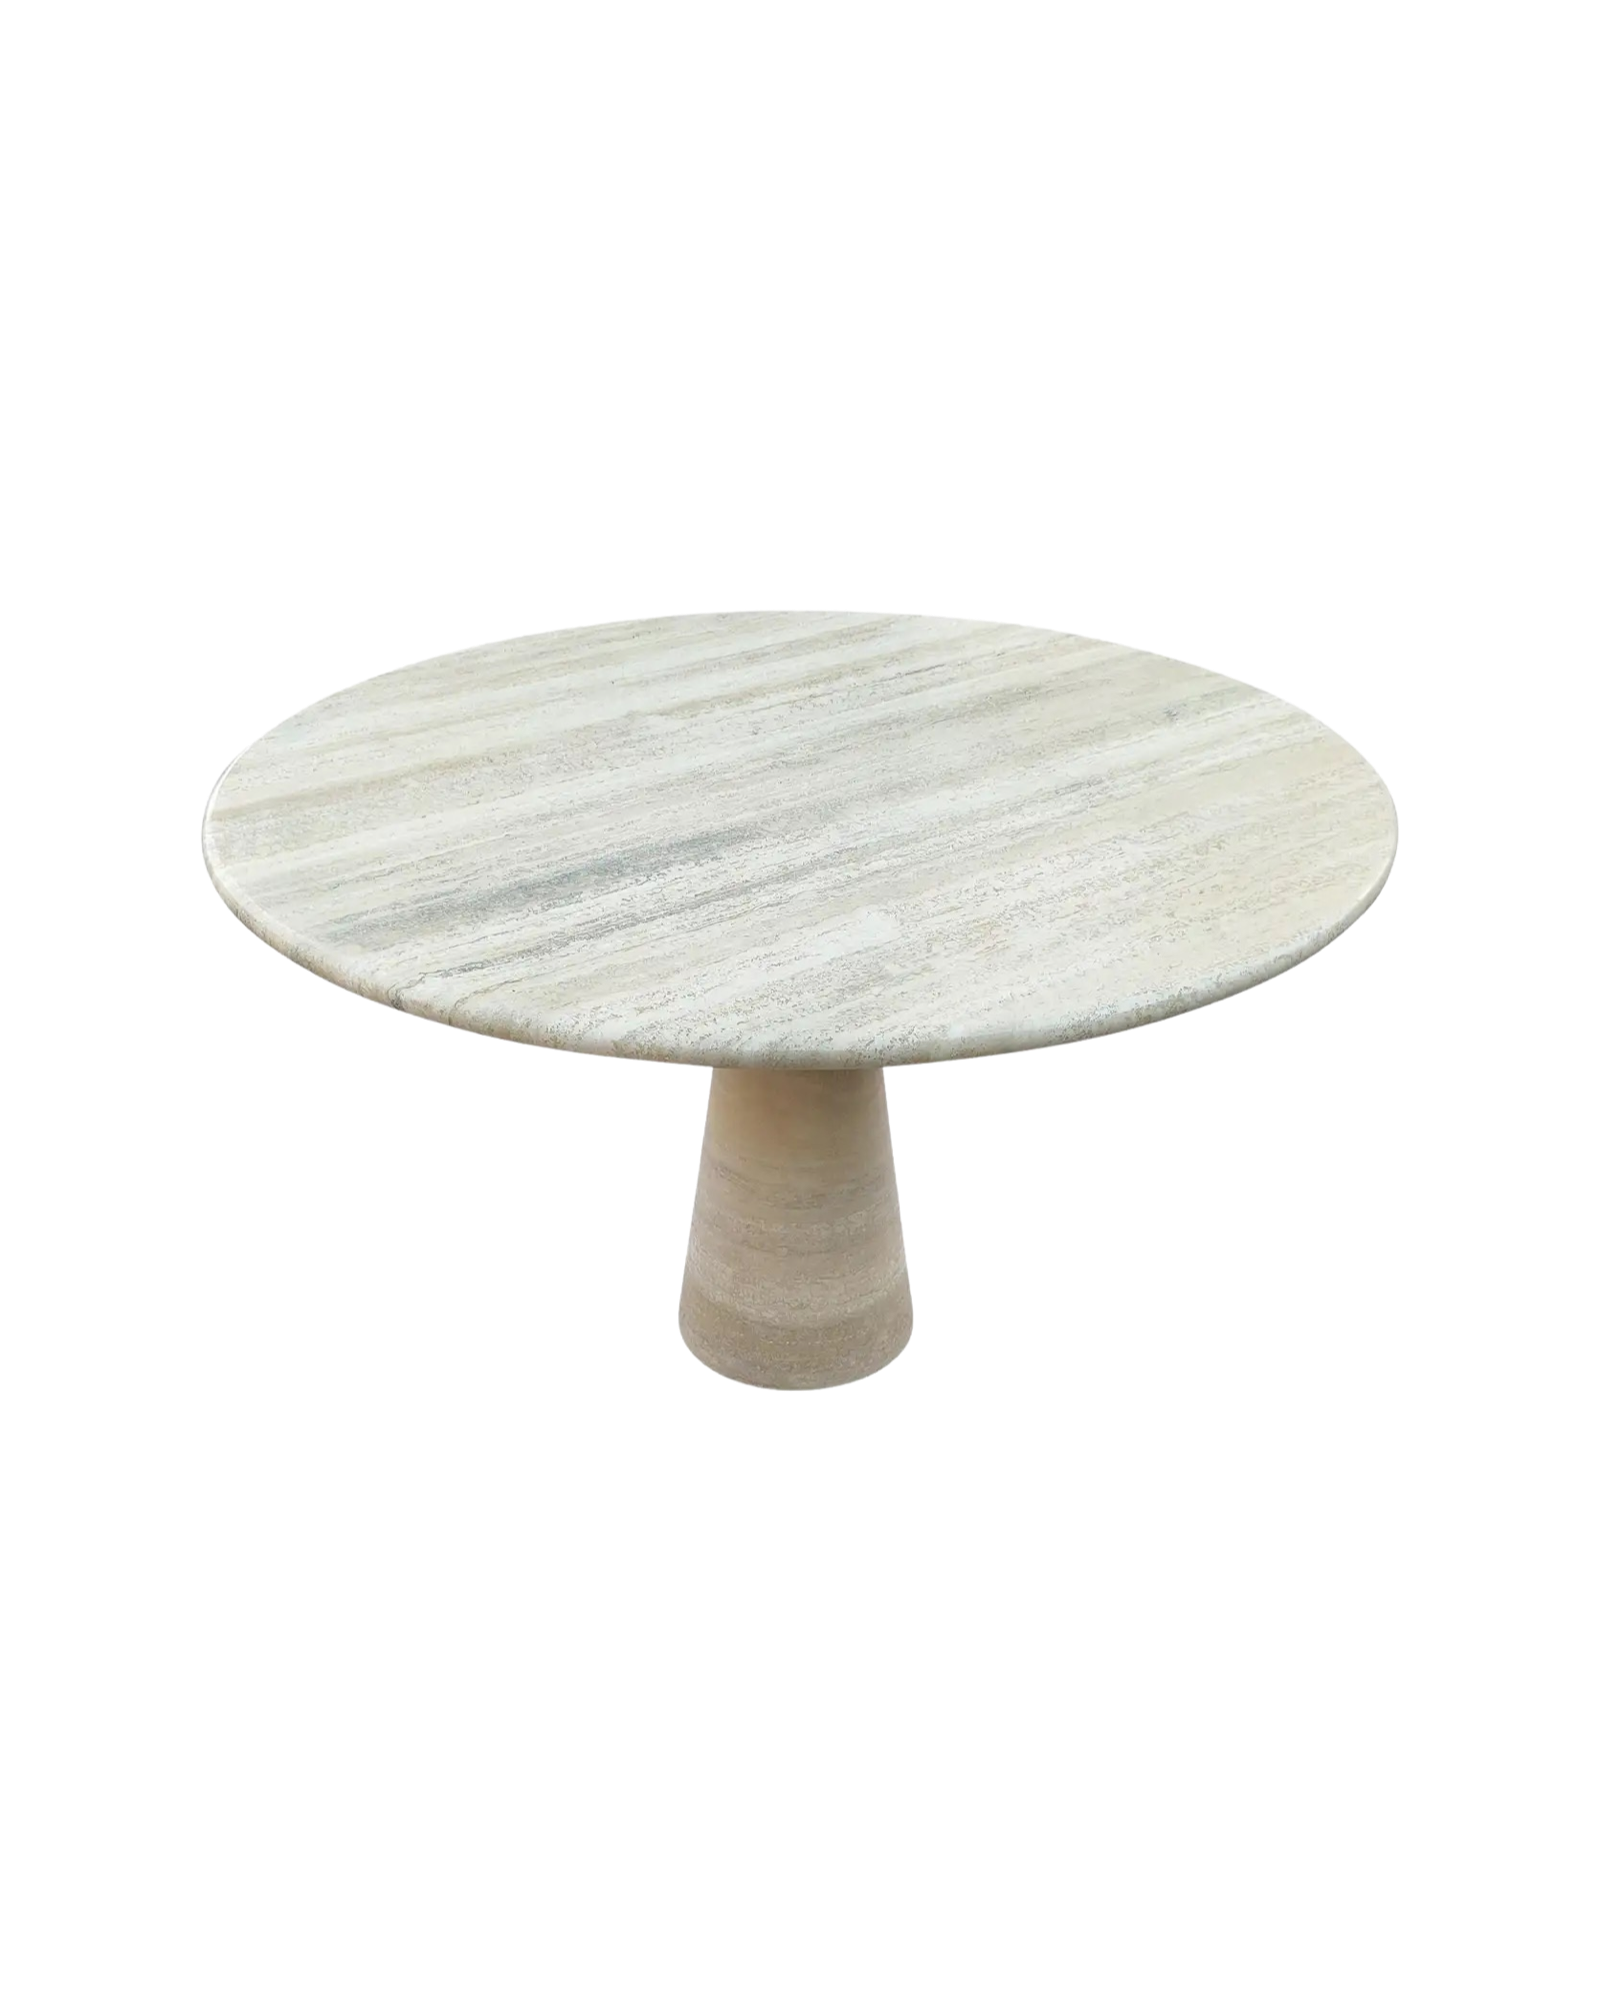 Attributed Round Travertine Pedestal Dining Table